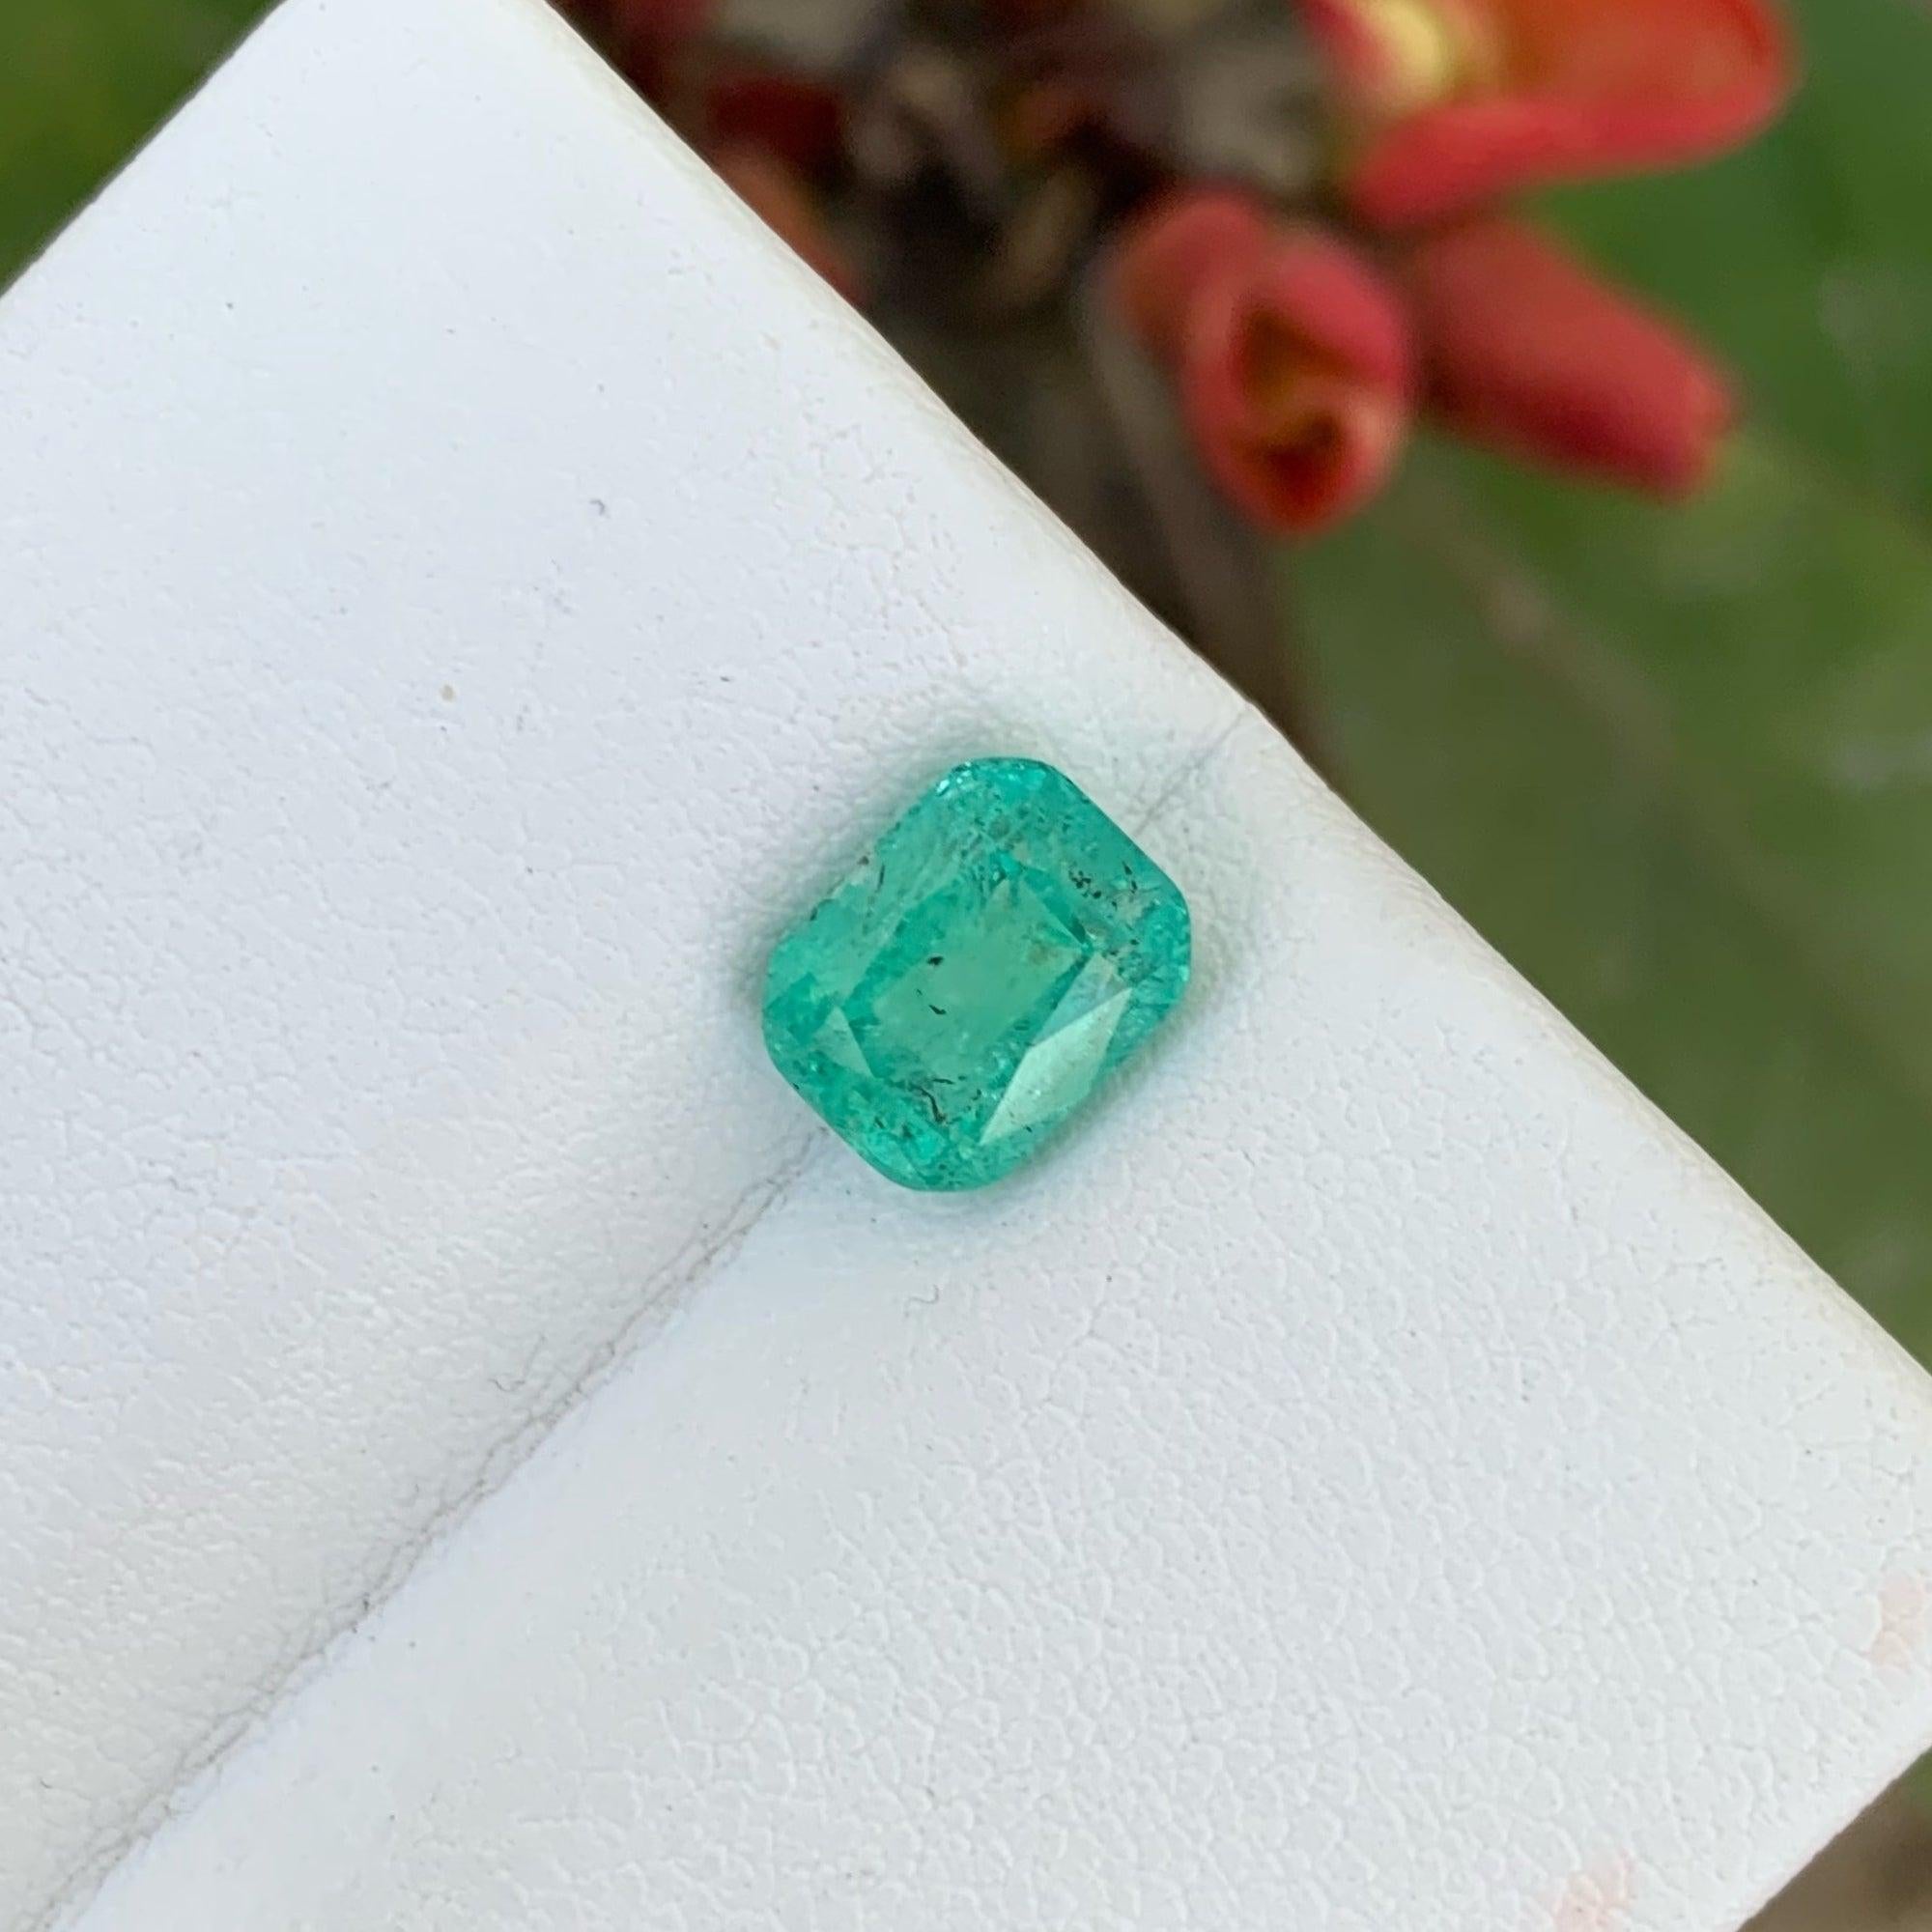 Lovely Green Emerald For Ring, Available For Sale At wholesale Price Natural High Quality, 1.50 Carats Natural Emerald From Afghanistan.

Product Information:
GEMSTONE TYPE: Lovely Green Emerald For Ring
WEIGHT: 1.50 Carats
DIMENSIONS: 7.3 x 5.8 x